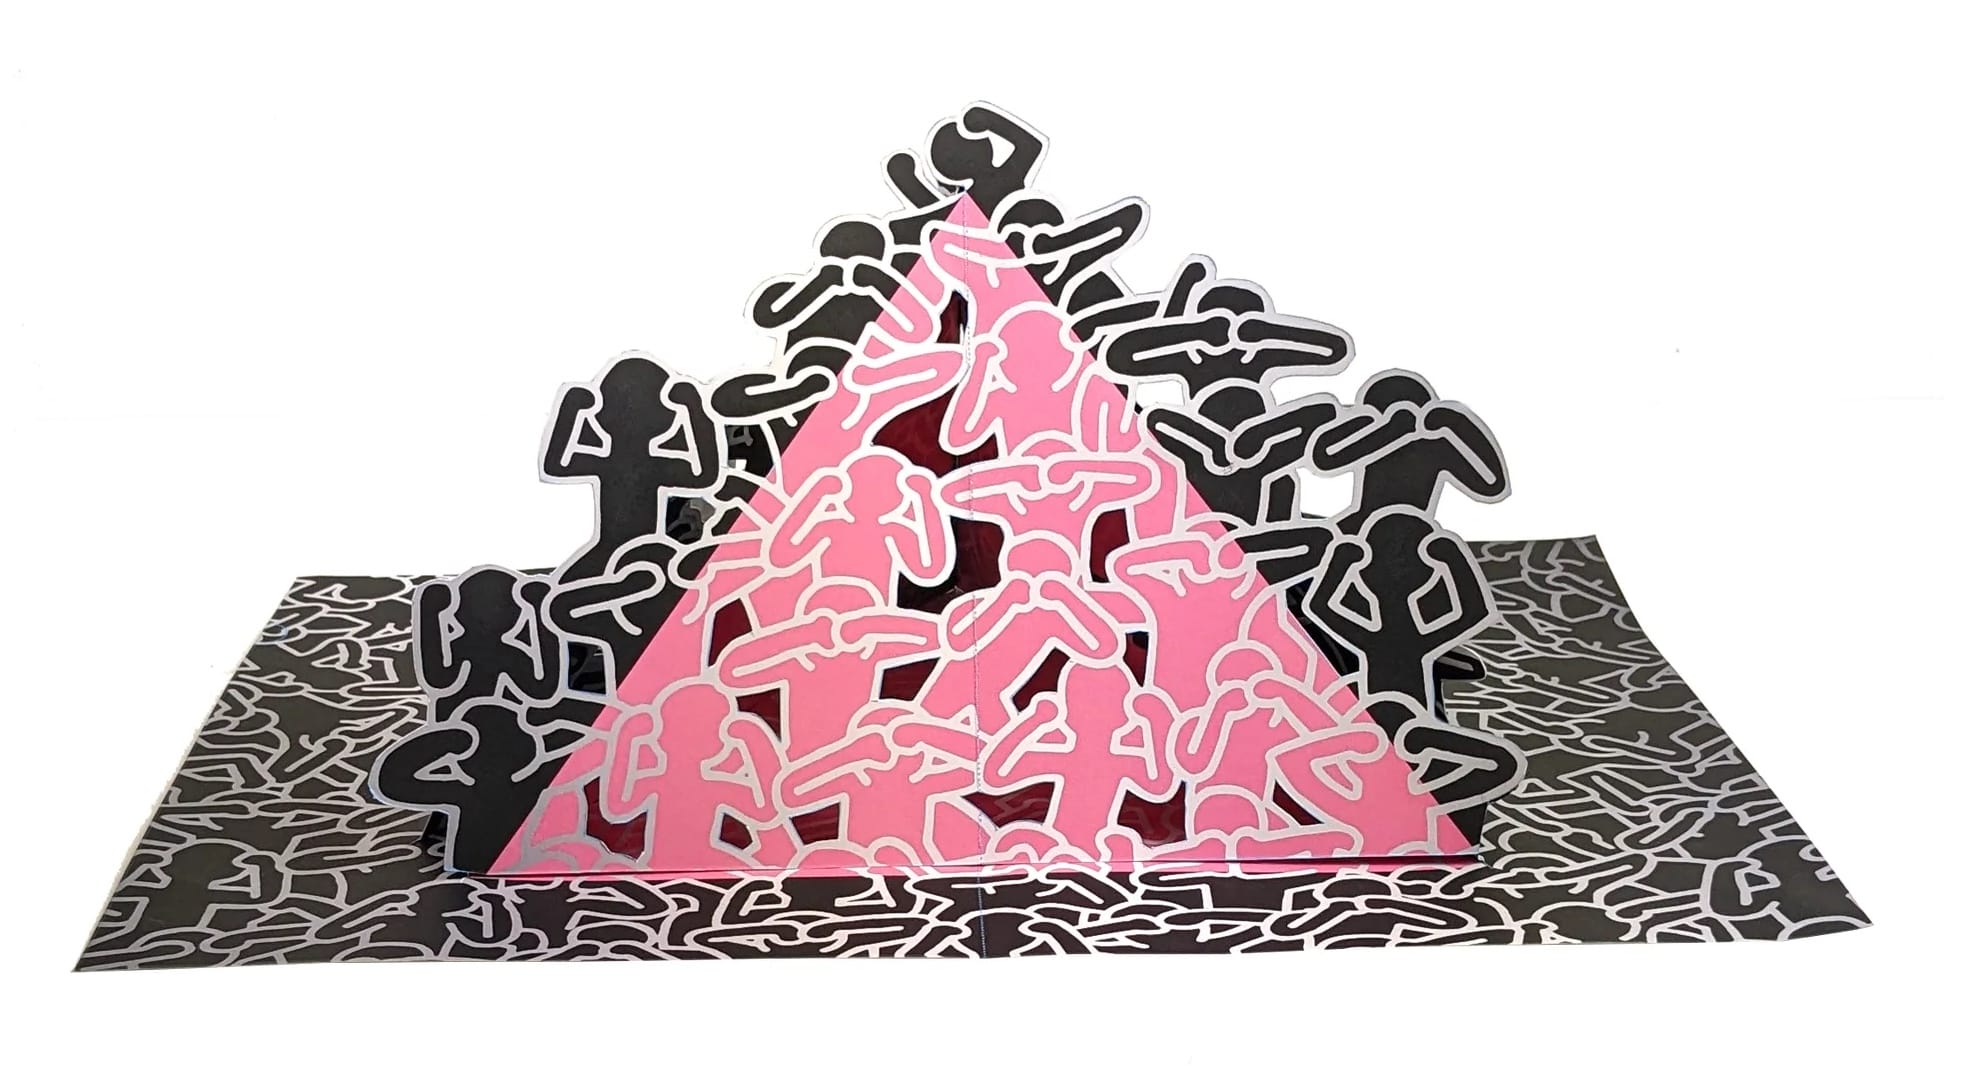 a pop-up paper spread from a pop-up book of artwork by Keith Haring, this piece depicting a pink and black pyramid made of abstract figures in a stack